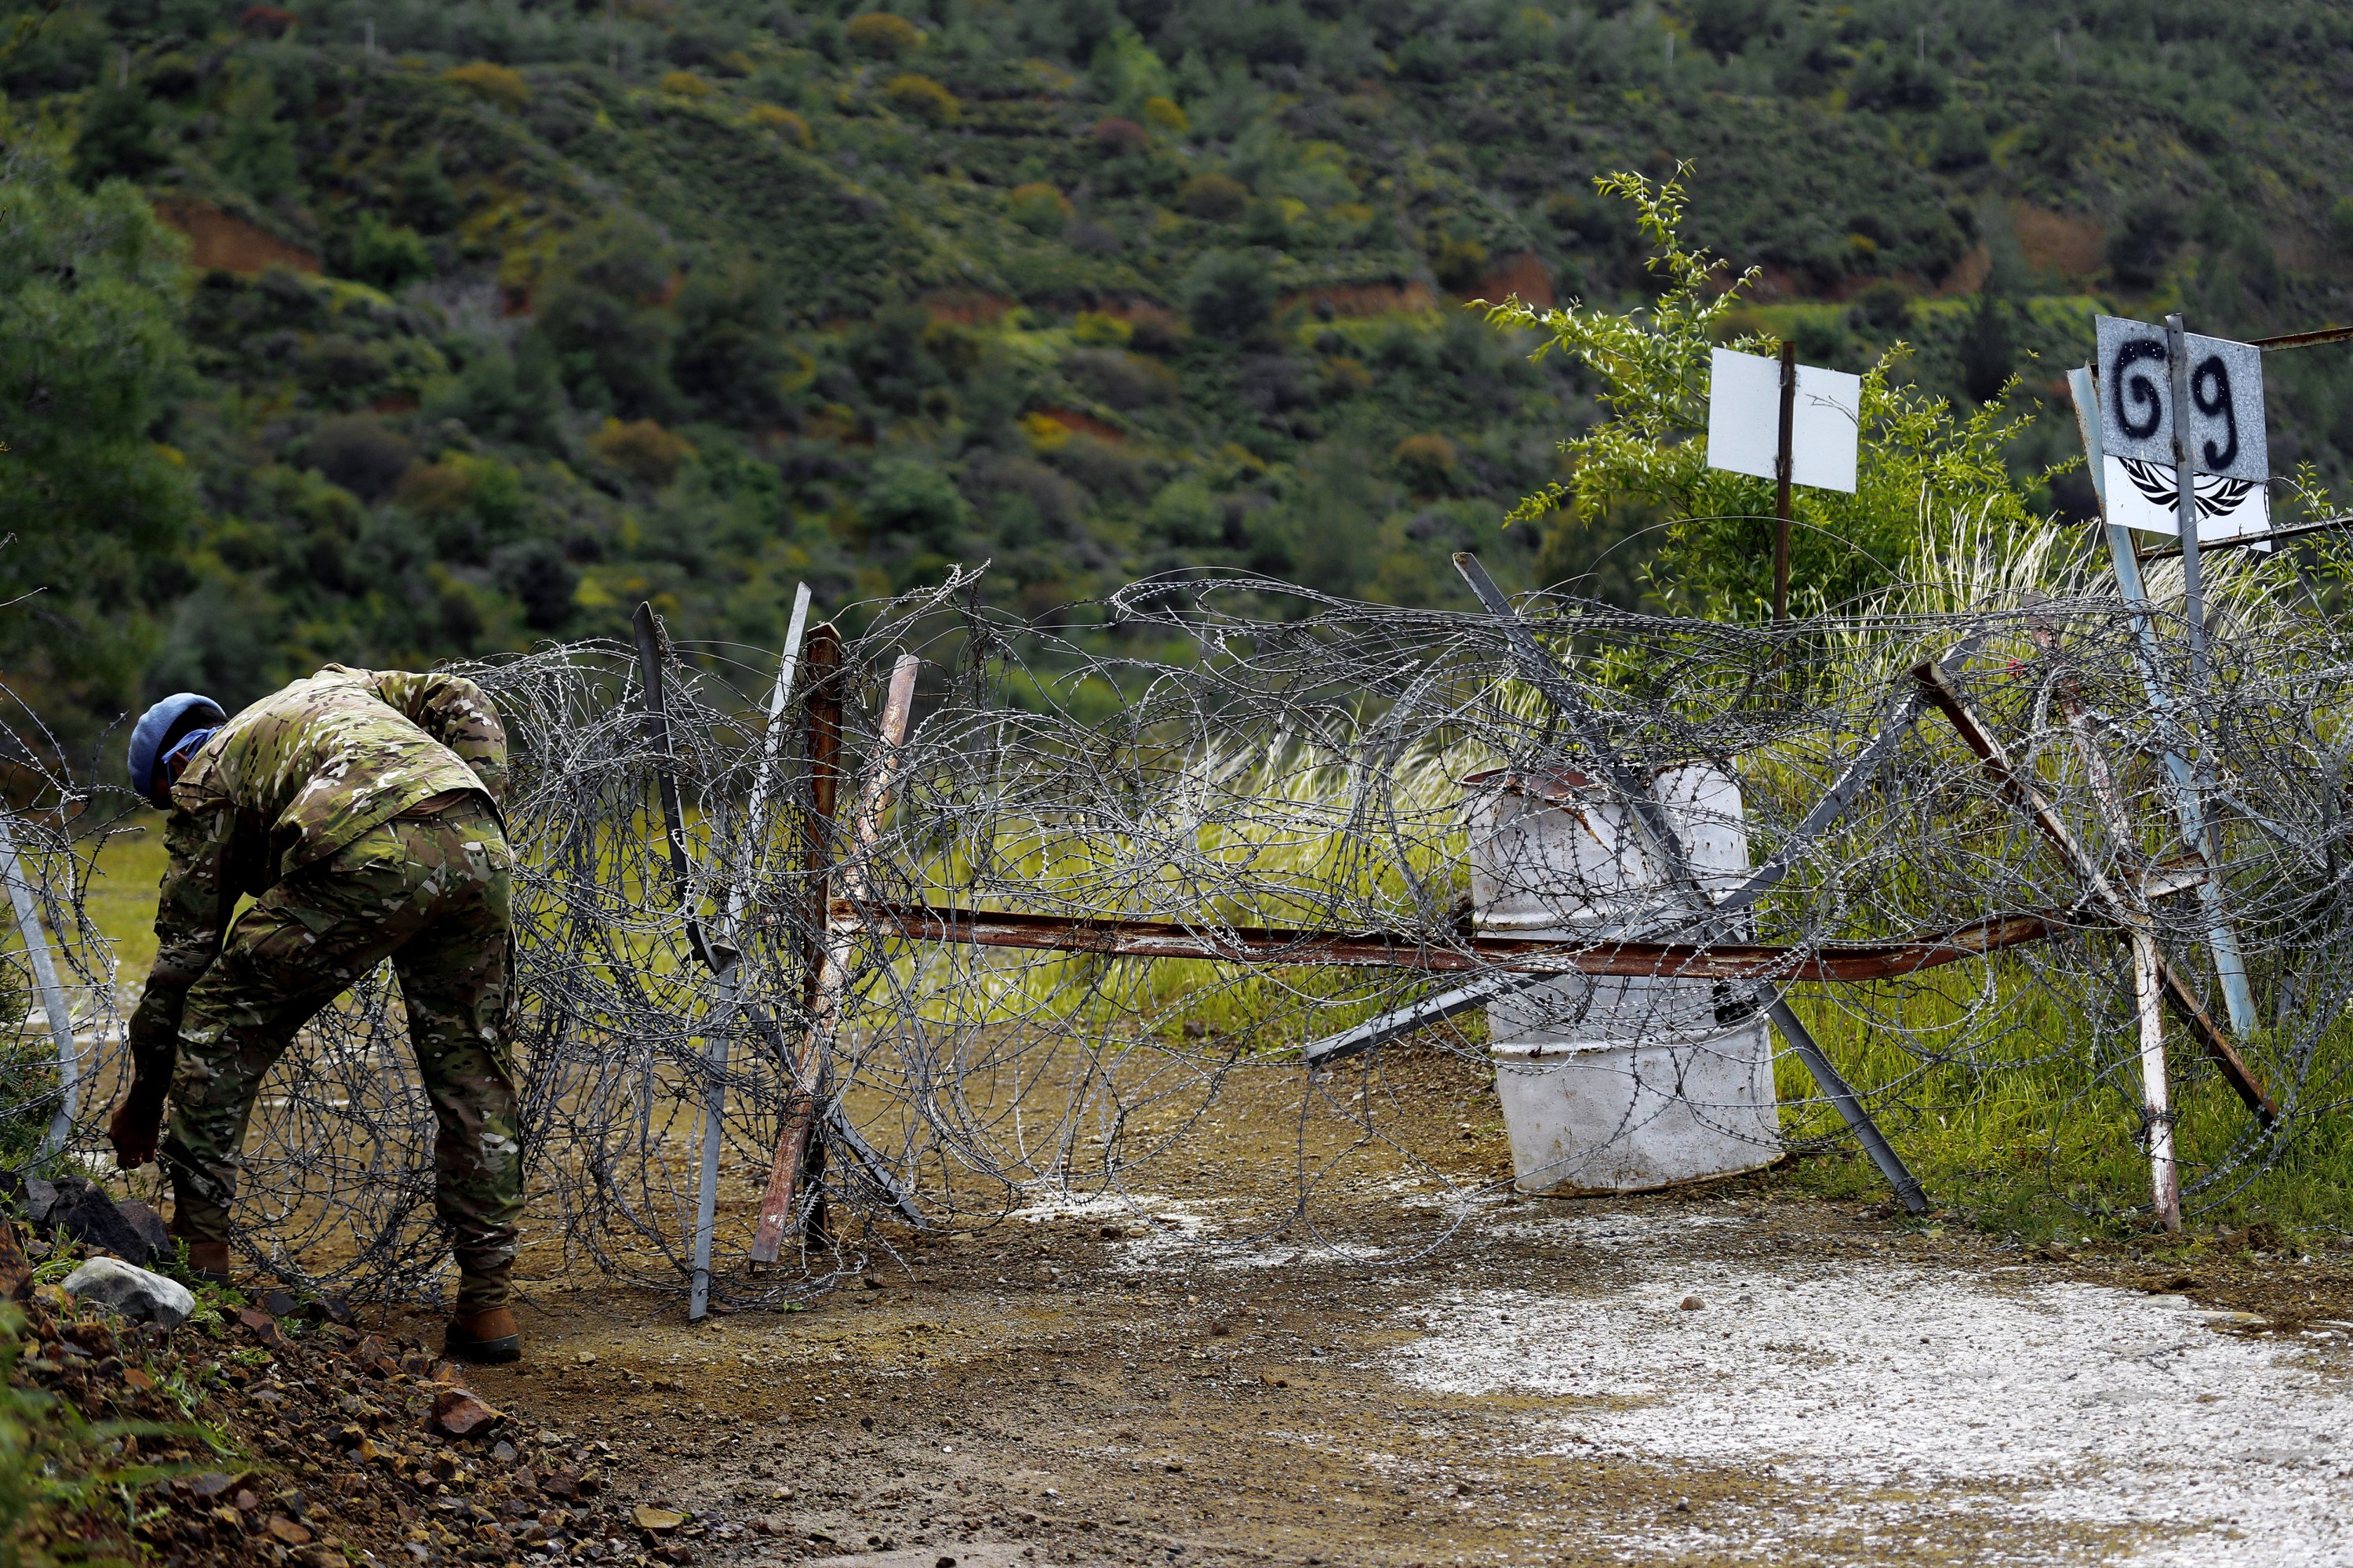 A U.N. peacekeeper removes the barbed wire from around the abandoned village of Varisia, inside the U.N.-controlled buffer zone that divides the Greek-controlled south and the Turkish-controlled north, on the island of Cyprus, March 26, 2021. (AP Photo)